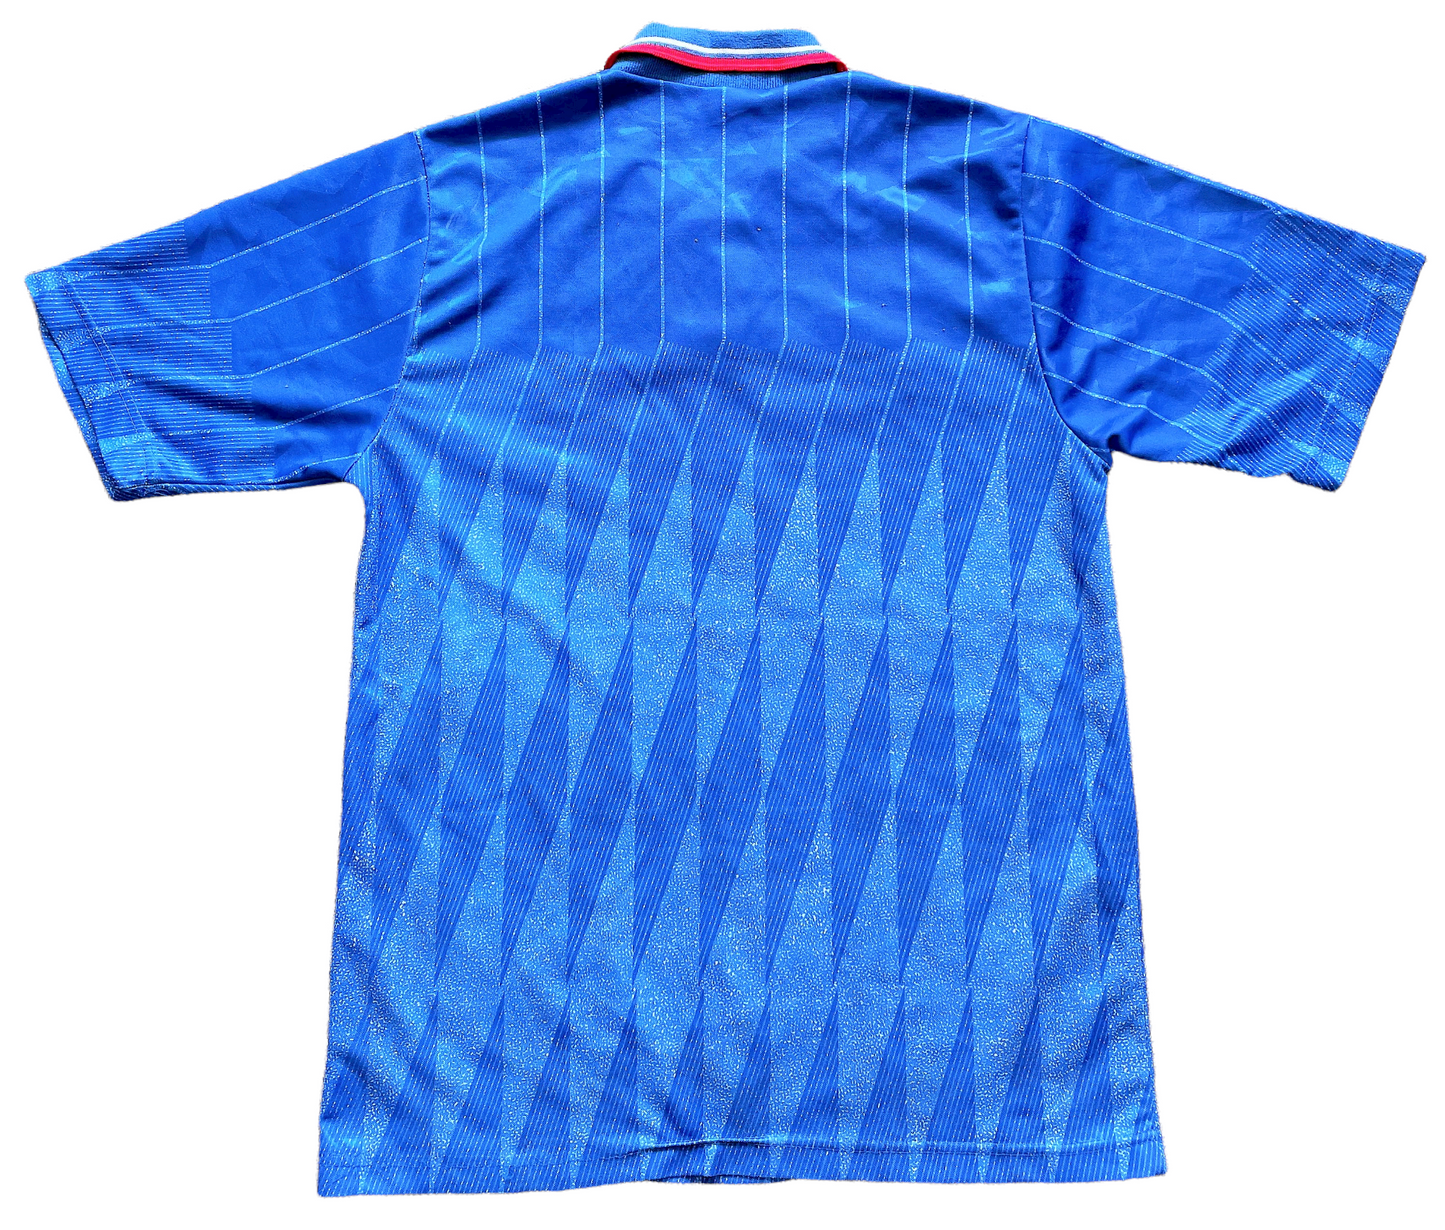 Chelsea 1989 Home Shirt (very good) Adults XXS/Youths 30-32. Height 19 inches